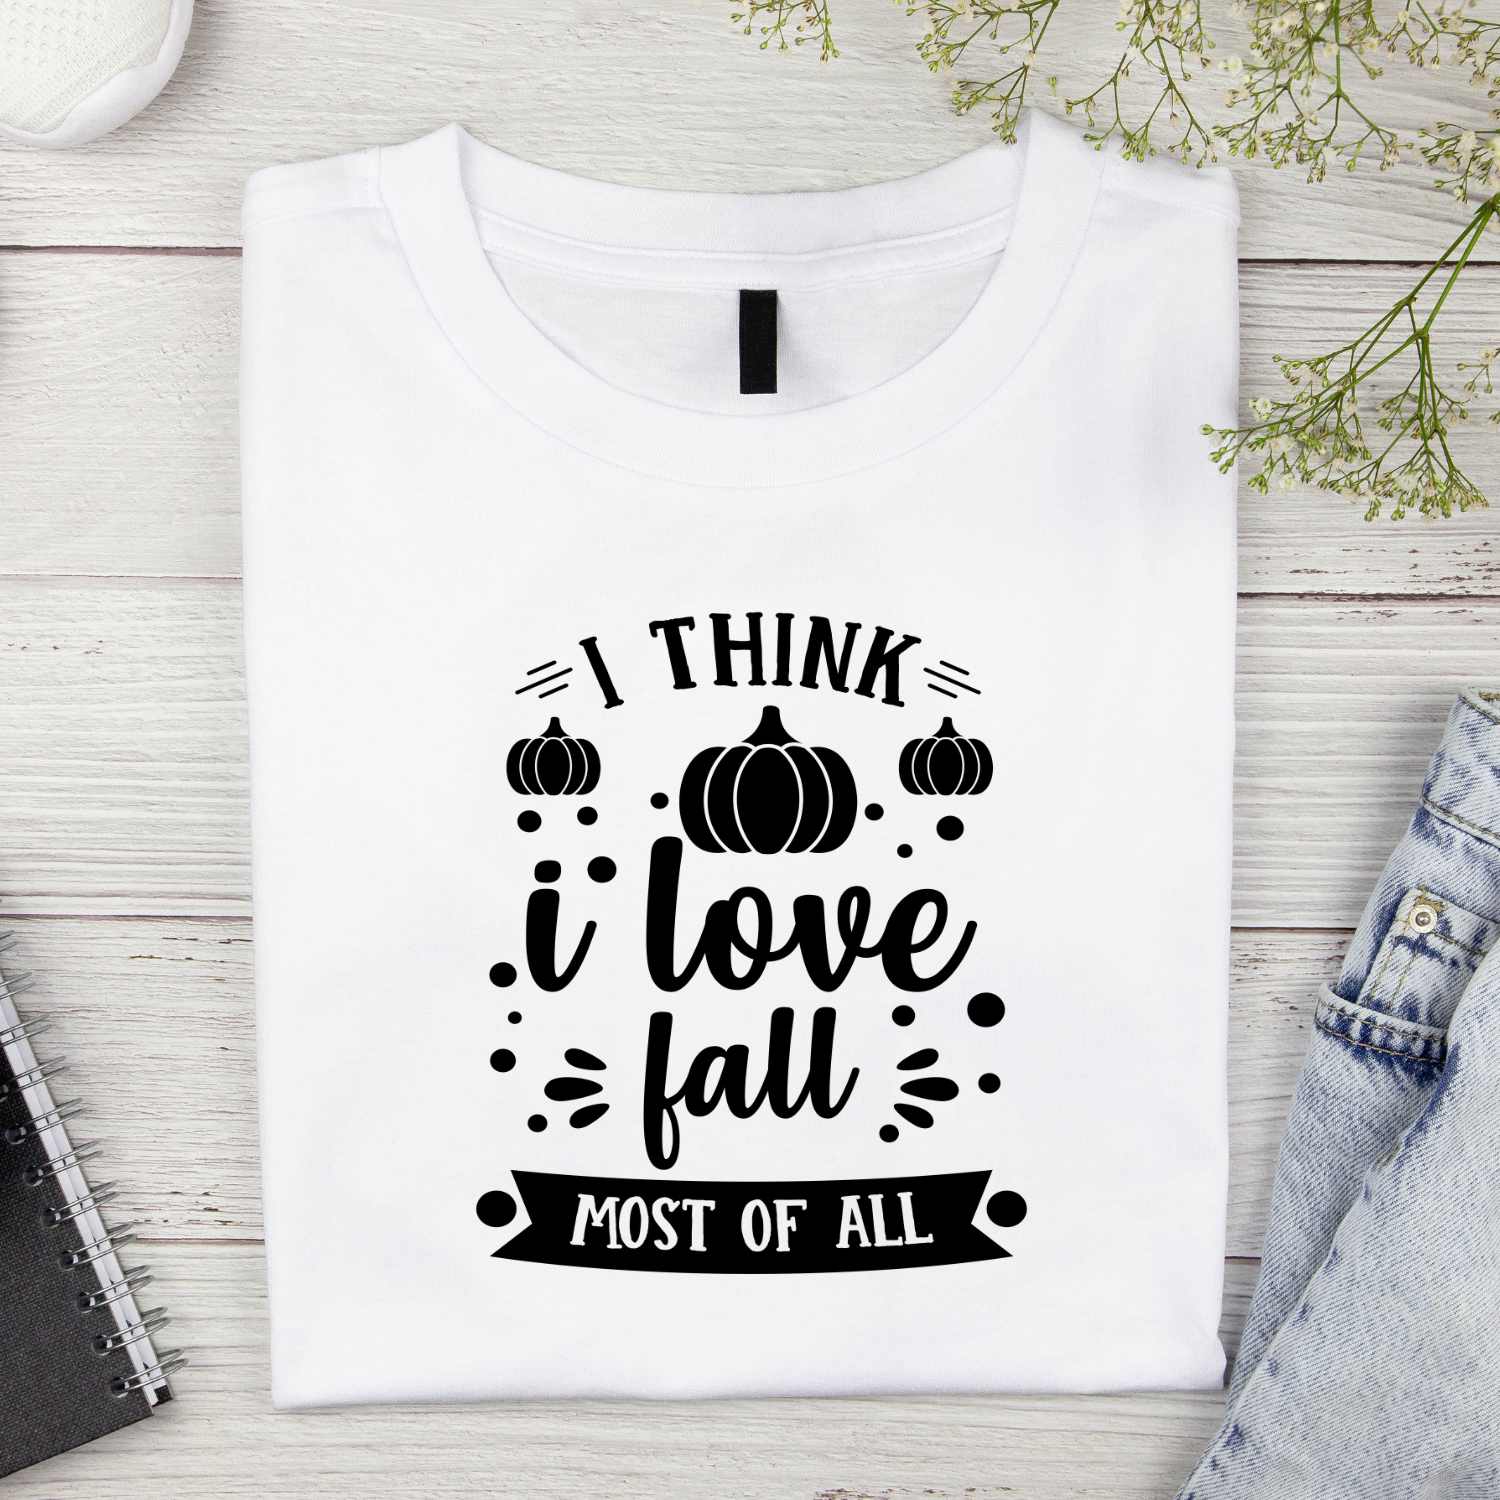 I Think I Love Fall And Most Of All Typography T-Shirt DesignFor DTG, DTF, White Toner and Sublimation Printing.